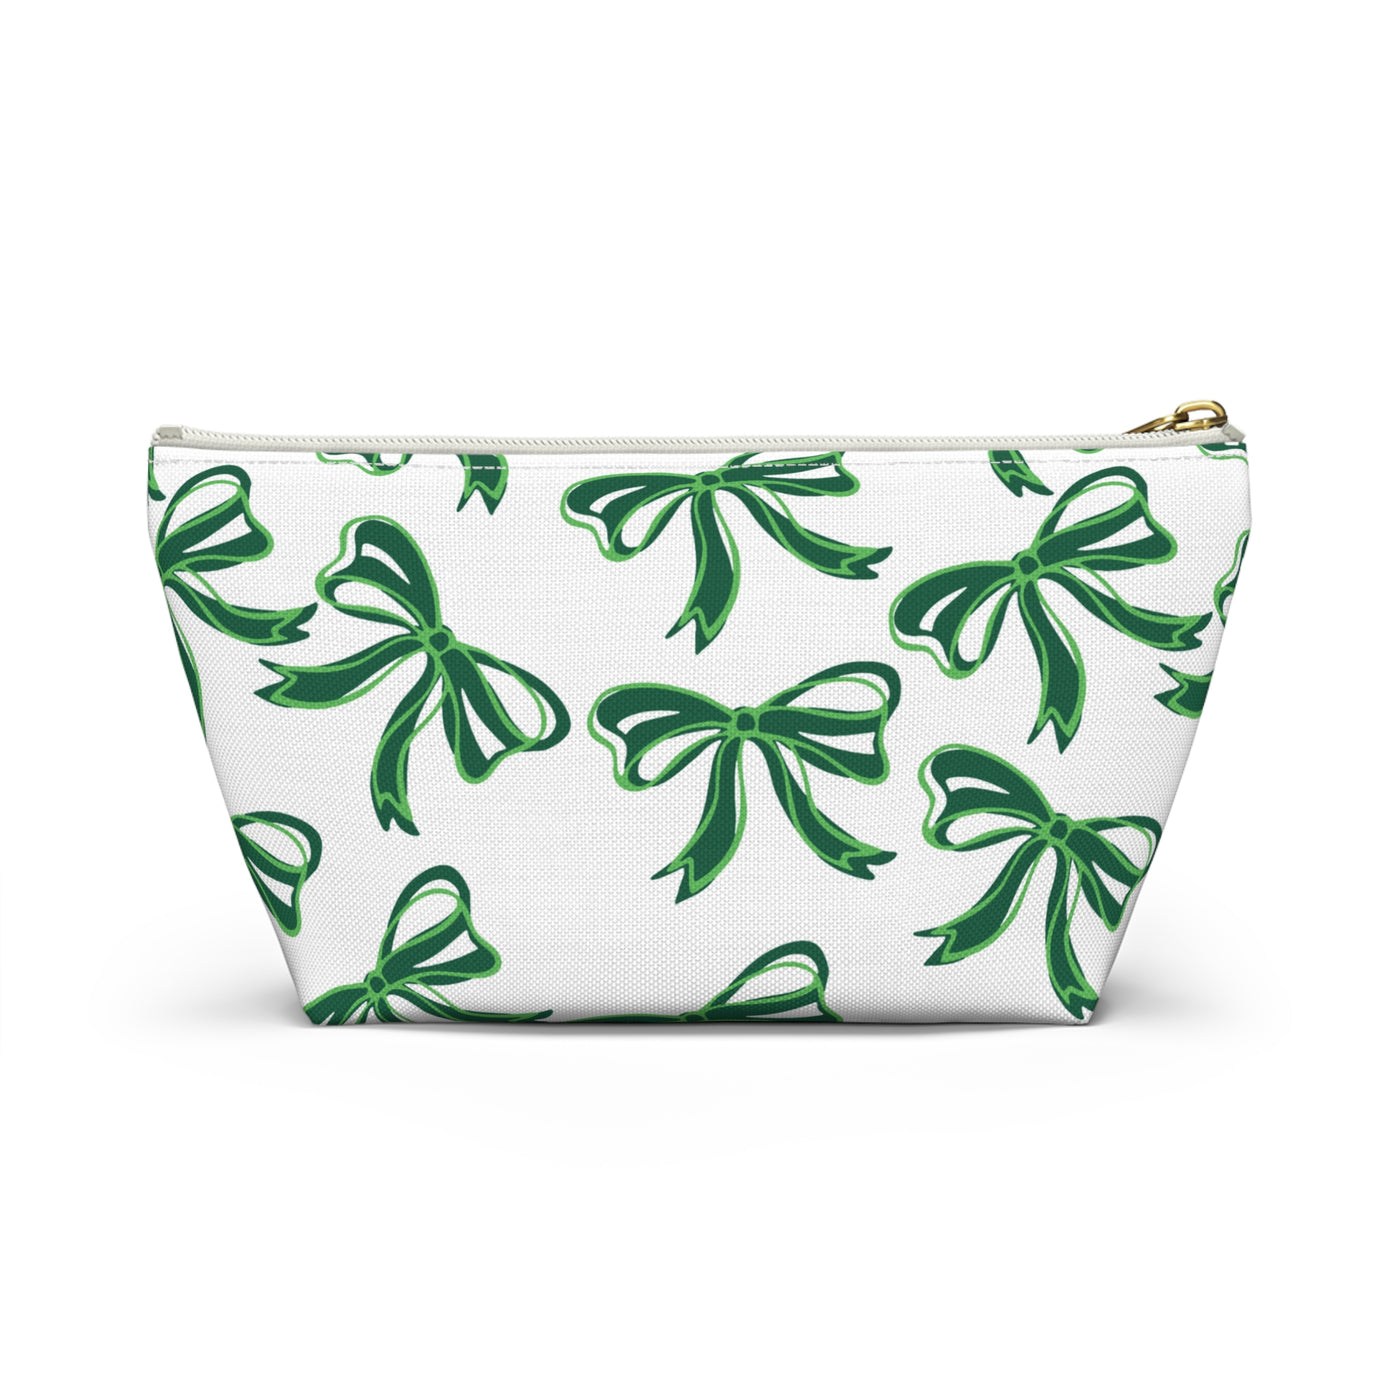 Trendy Bow Makeup Bag - Graduation Gift, Bed Party Gift, Acceptance Gift, College Gift, Binghamton Bearcats, BING, green and white